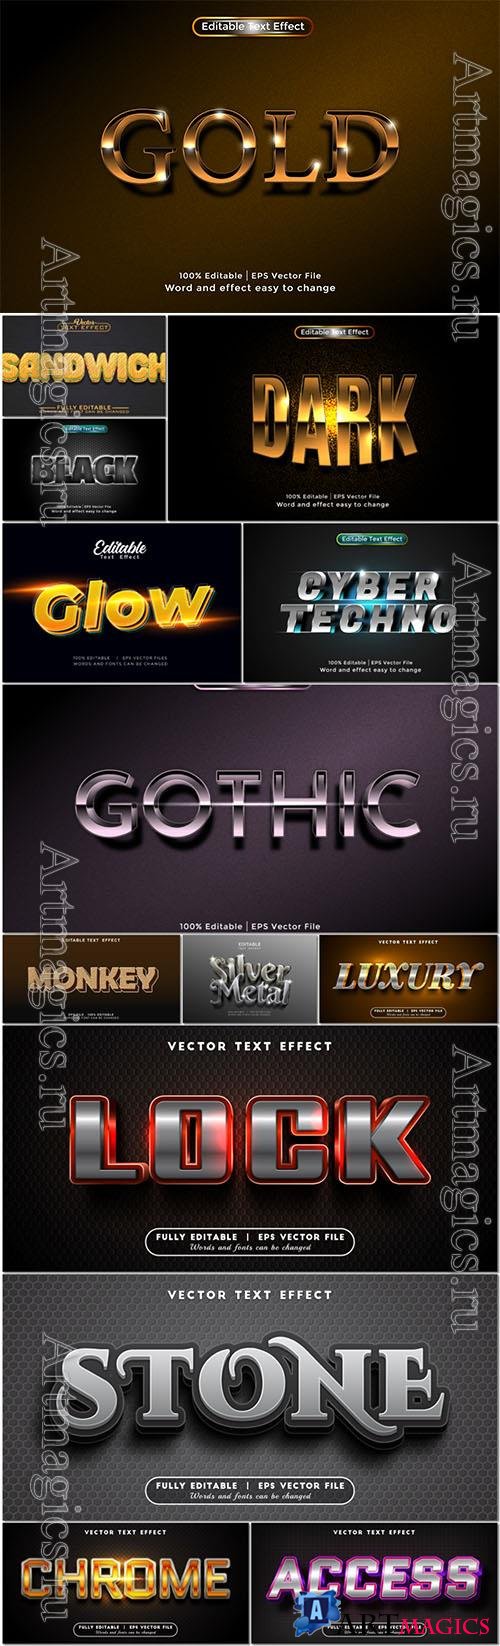 Stylish vector 3d text effects